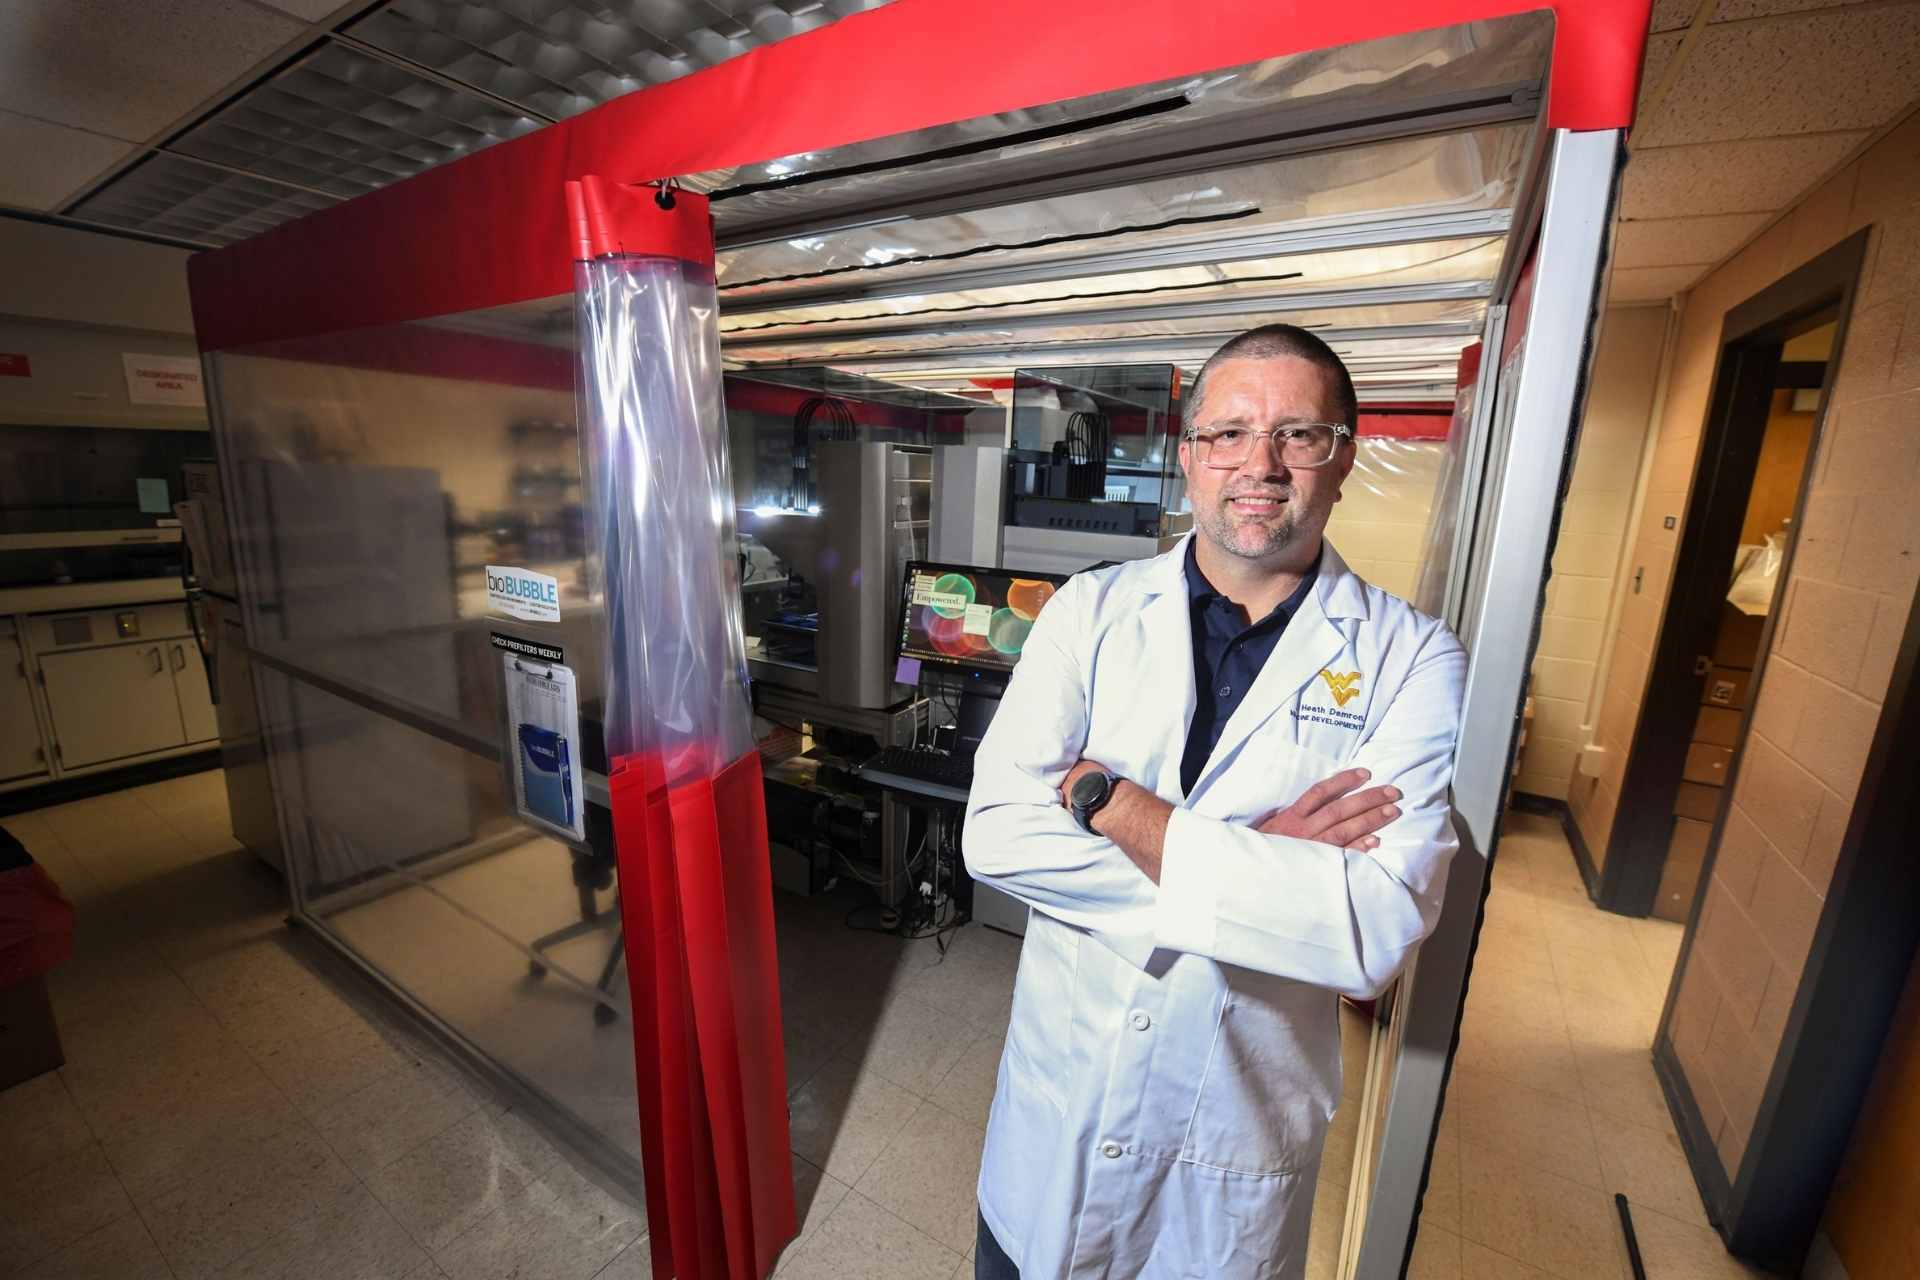 Heath Damron, director of the WVU Vaccine Development Center, has led a team that has created a nasal mist vaccine against COVID-19, according to tests. (WVU Photo/Brian Persinger)